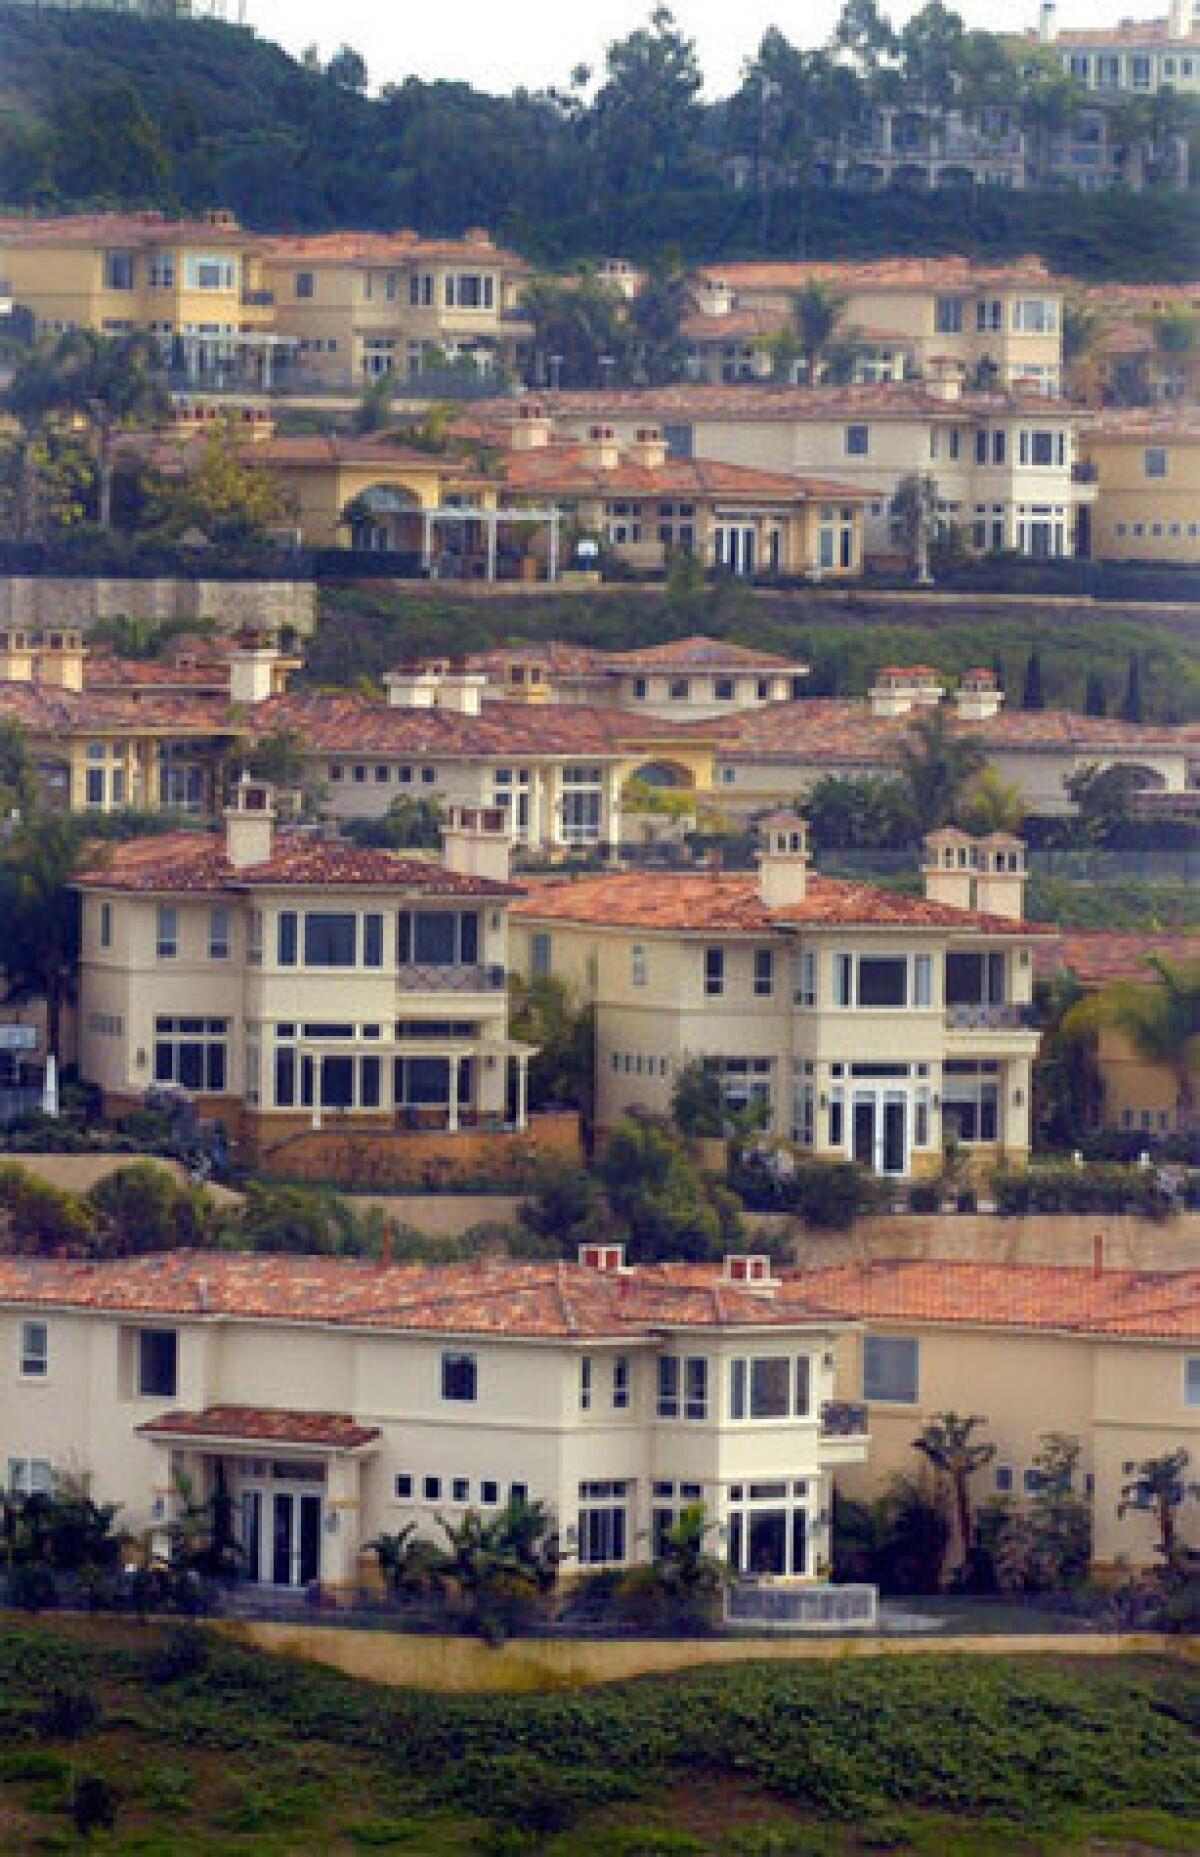 Interest-only mortgages are rare in the mass market these days, but affluent borrowers sometimes want them — and banks are writing them for the jumbo market. Above, Newport Coast in Orange County.